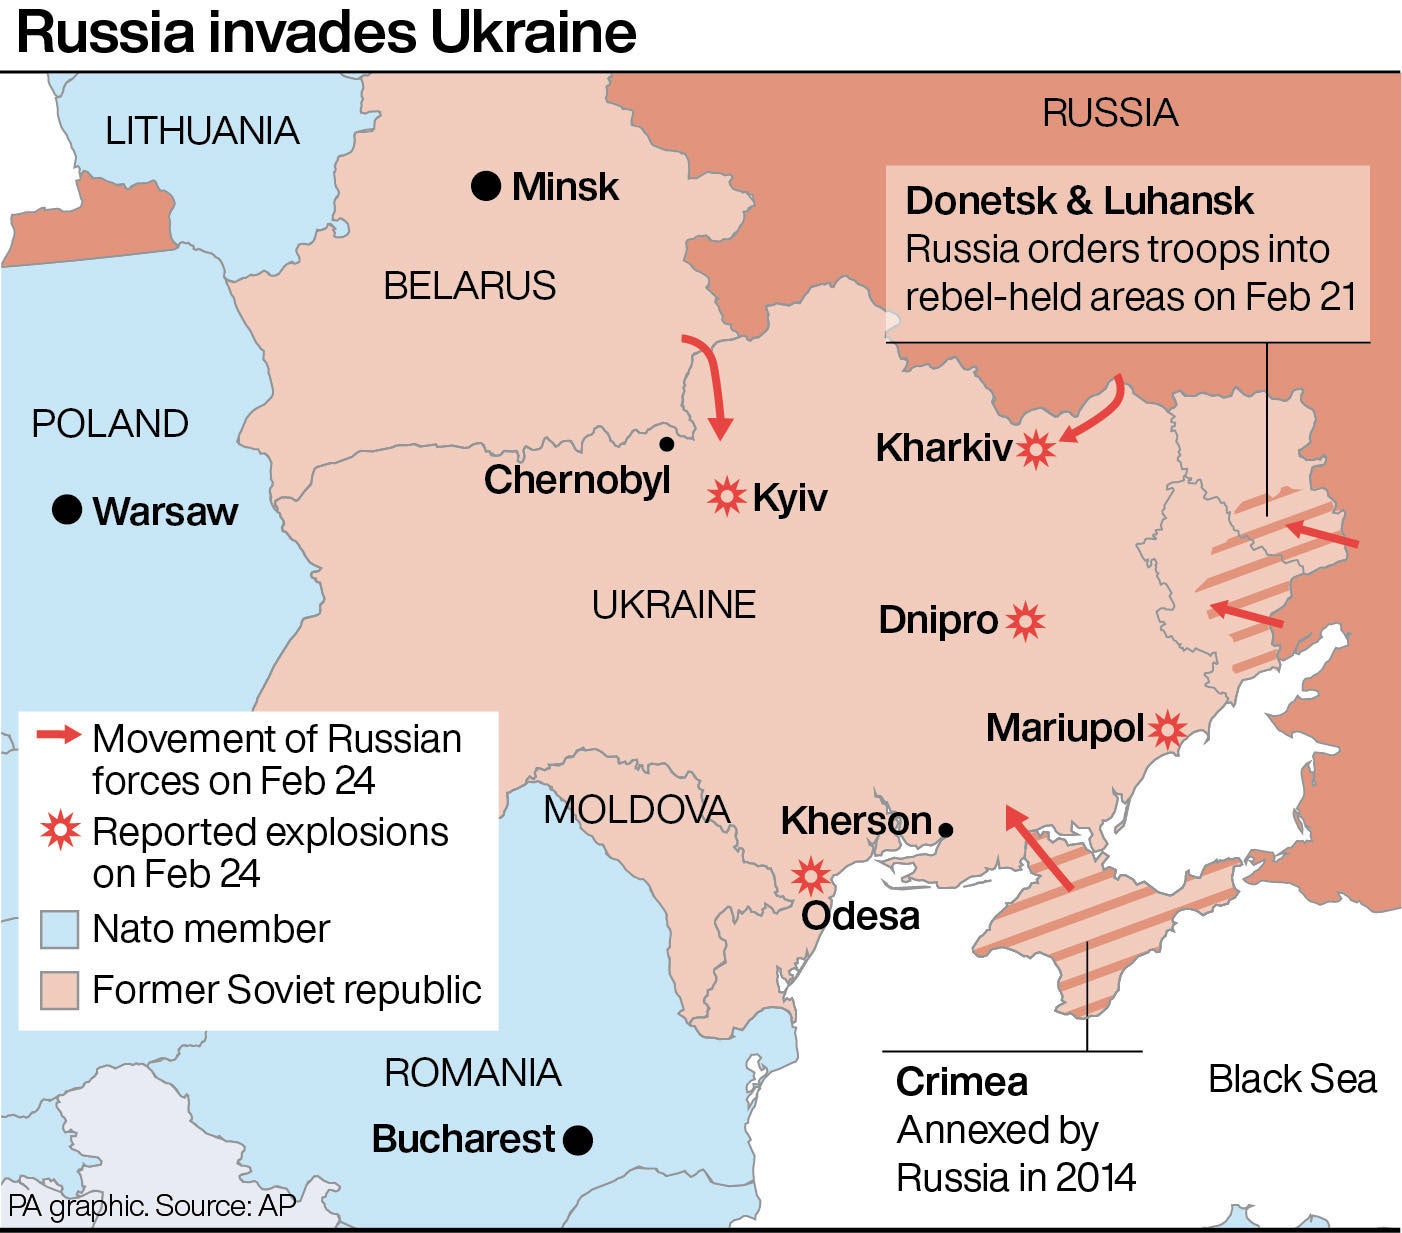 This PA graphic details Russia’s advancement on Ukraine